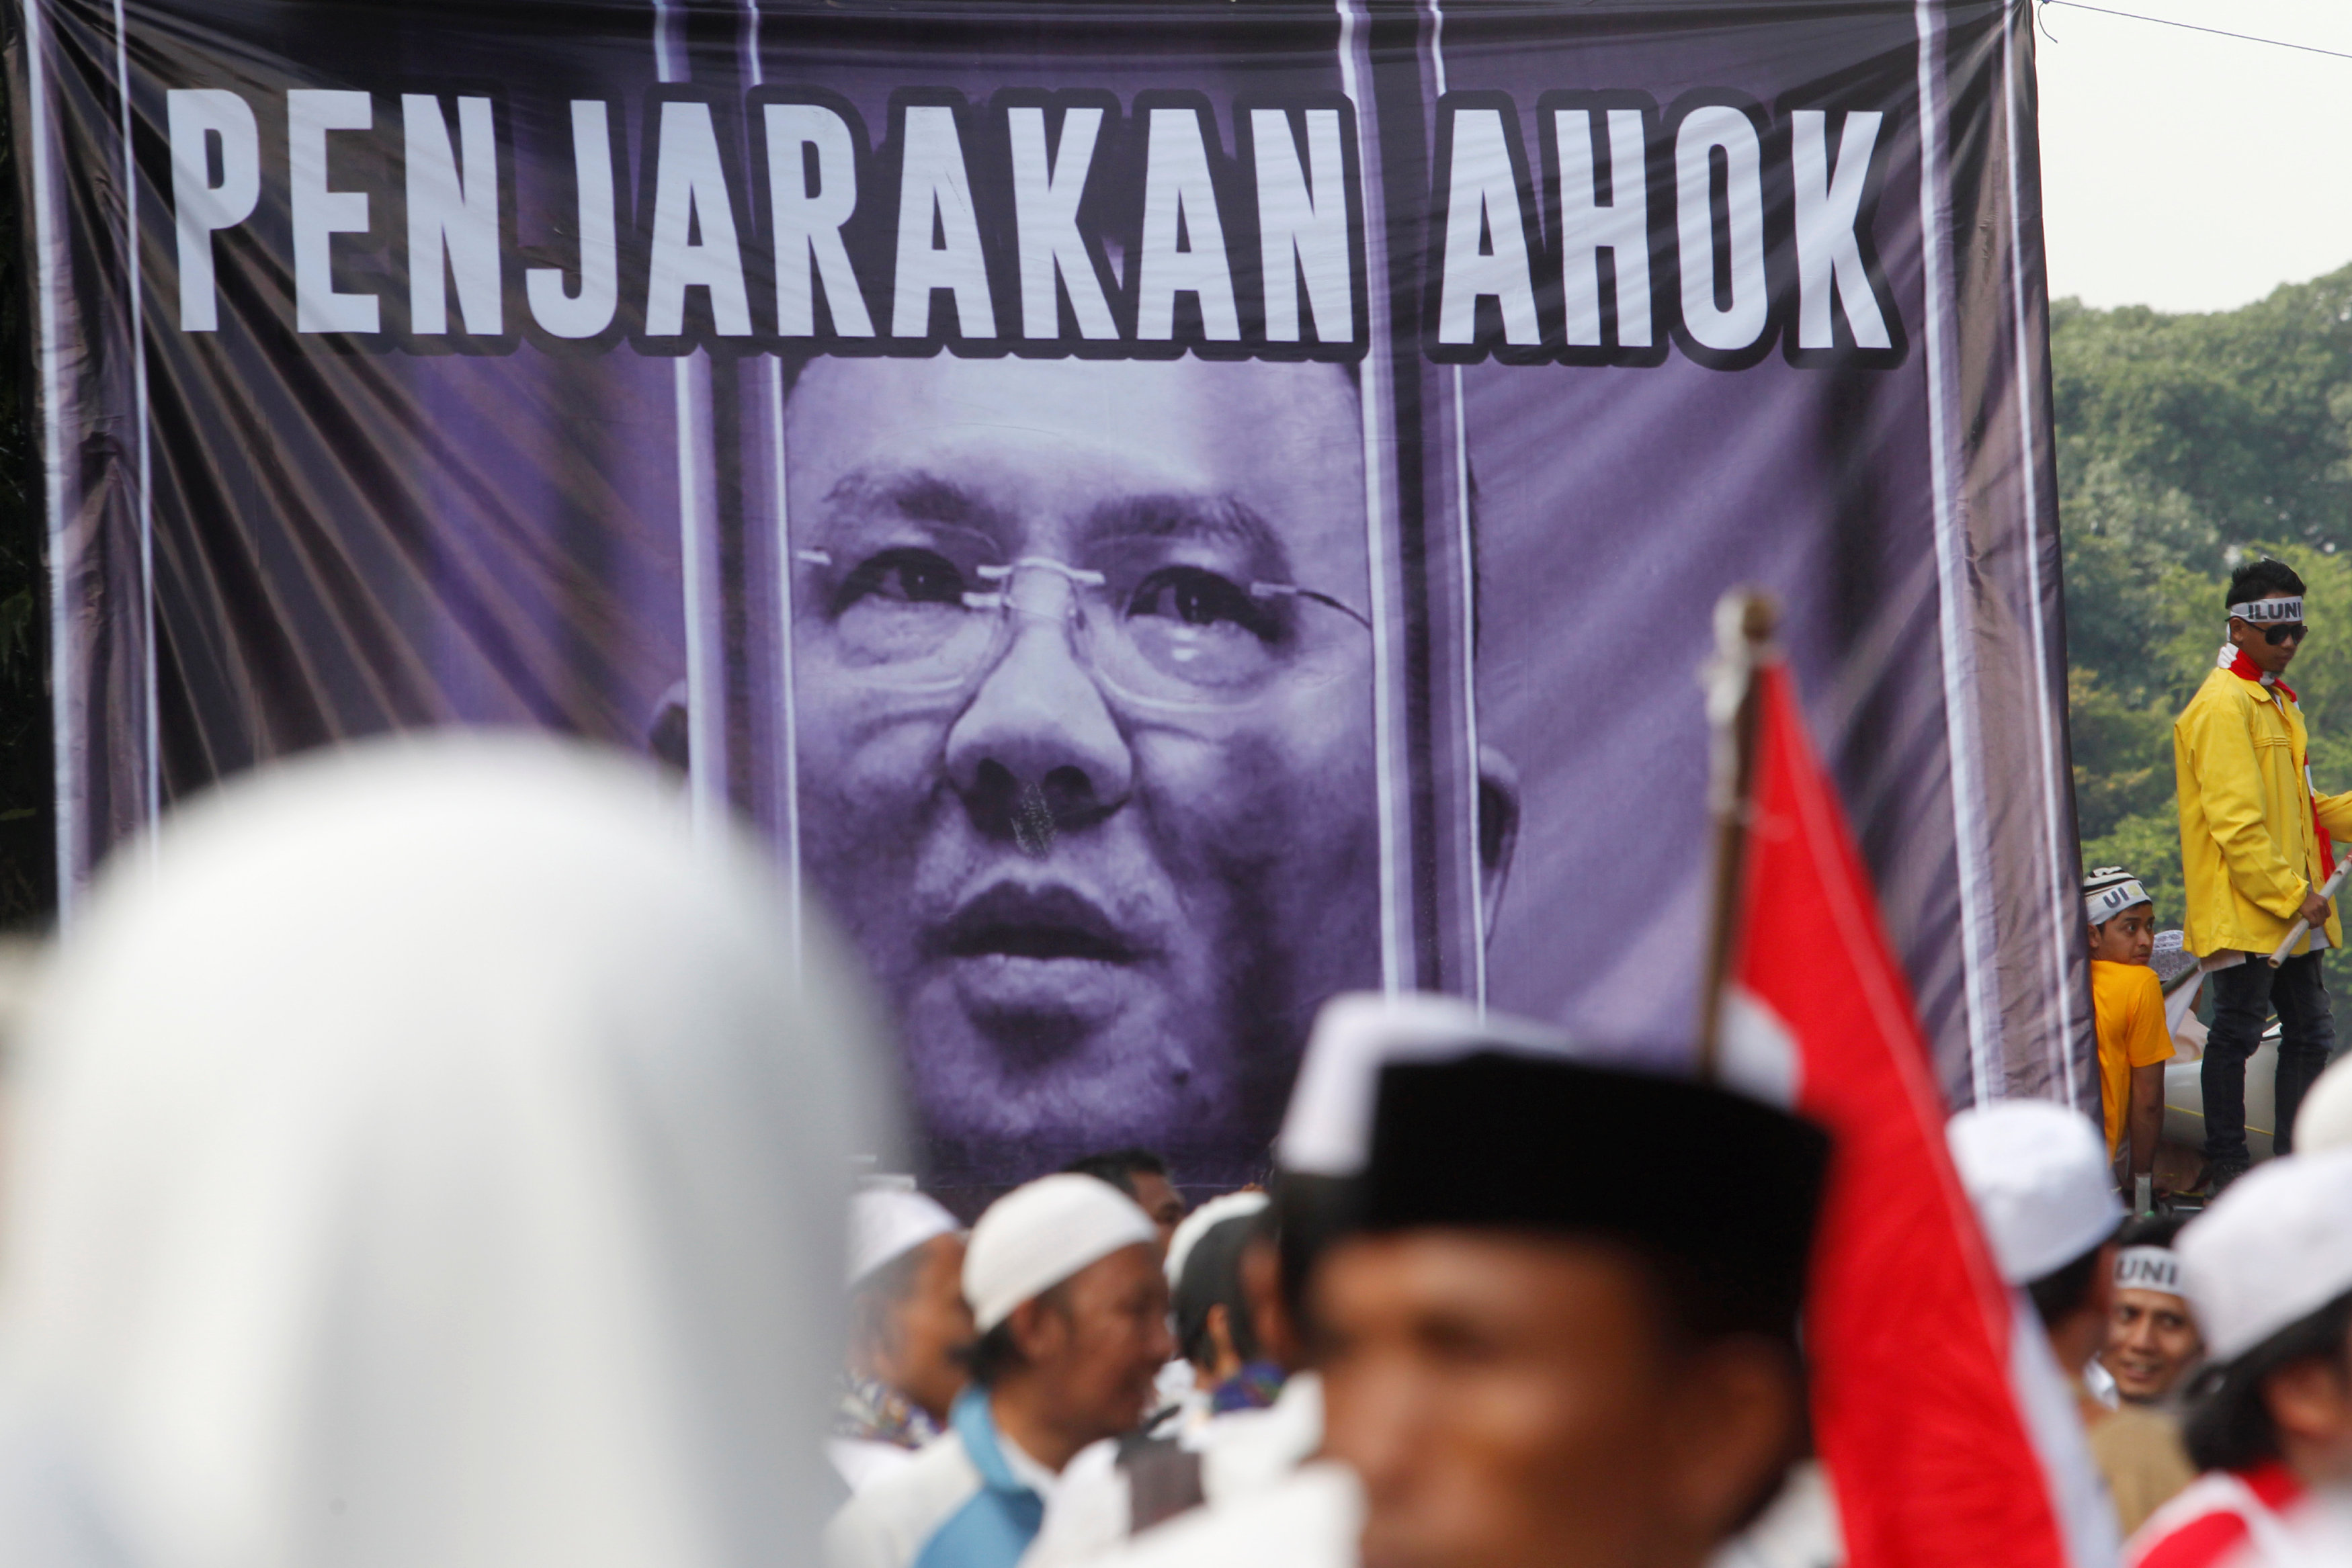 Members of hardline Muslim groups stand around a poster during protest against Jakarta's incumbent governor Basuki Tjahaja Purnama, an ethnic Chinese Christian running in the upcoming election, in Jakarta, Indonesia, November 4, 2016. Poster said ,Ahok sh